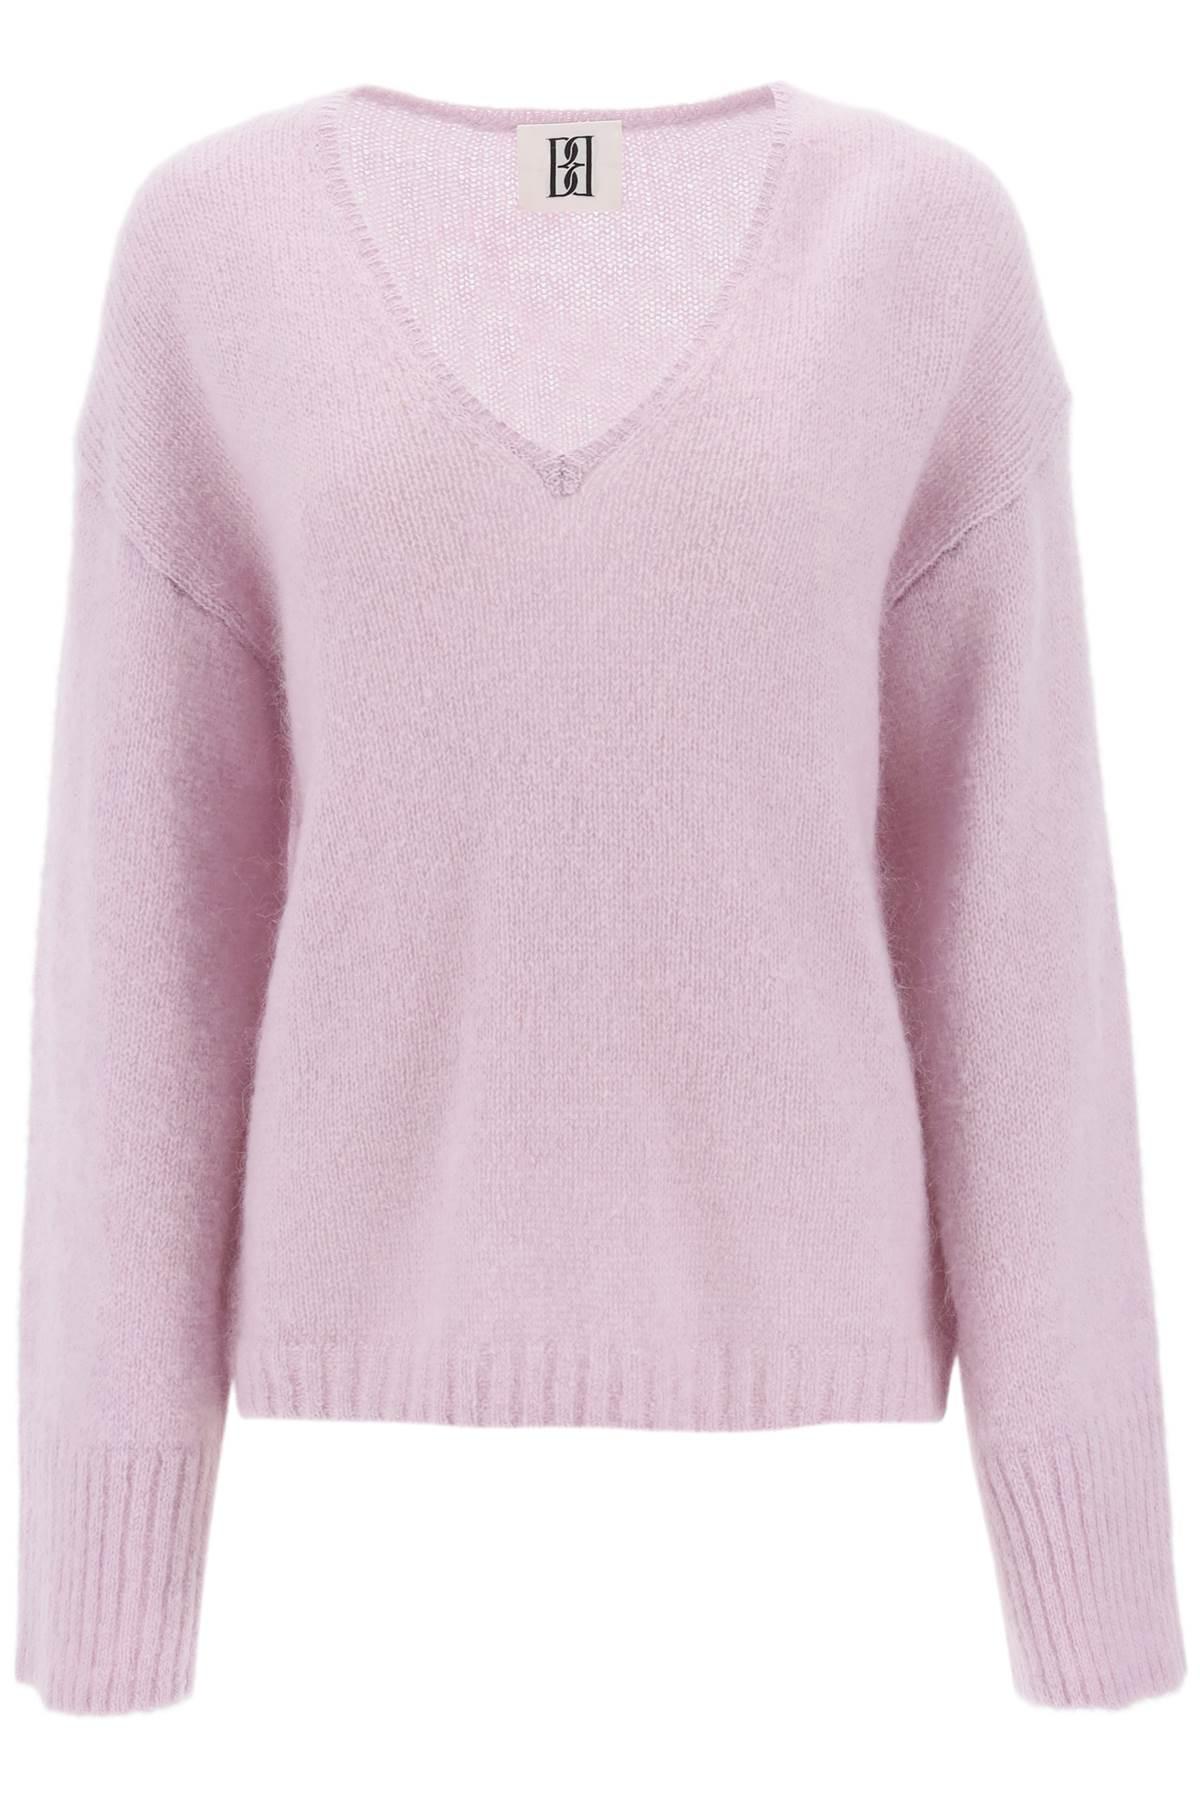 By Malene Birger Wool And Mohair Cimone Sweater in Pink | Lyst